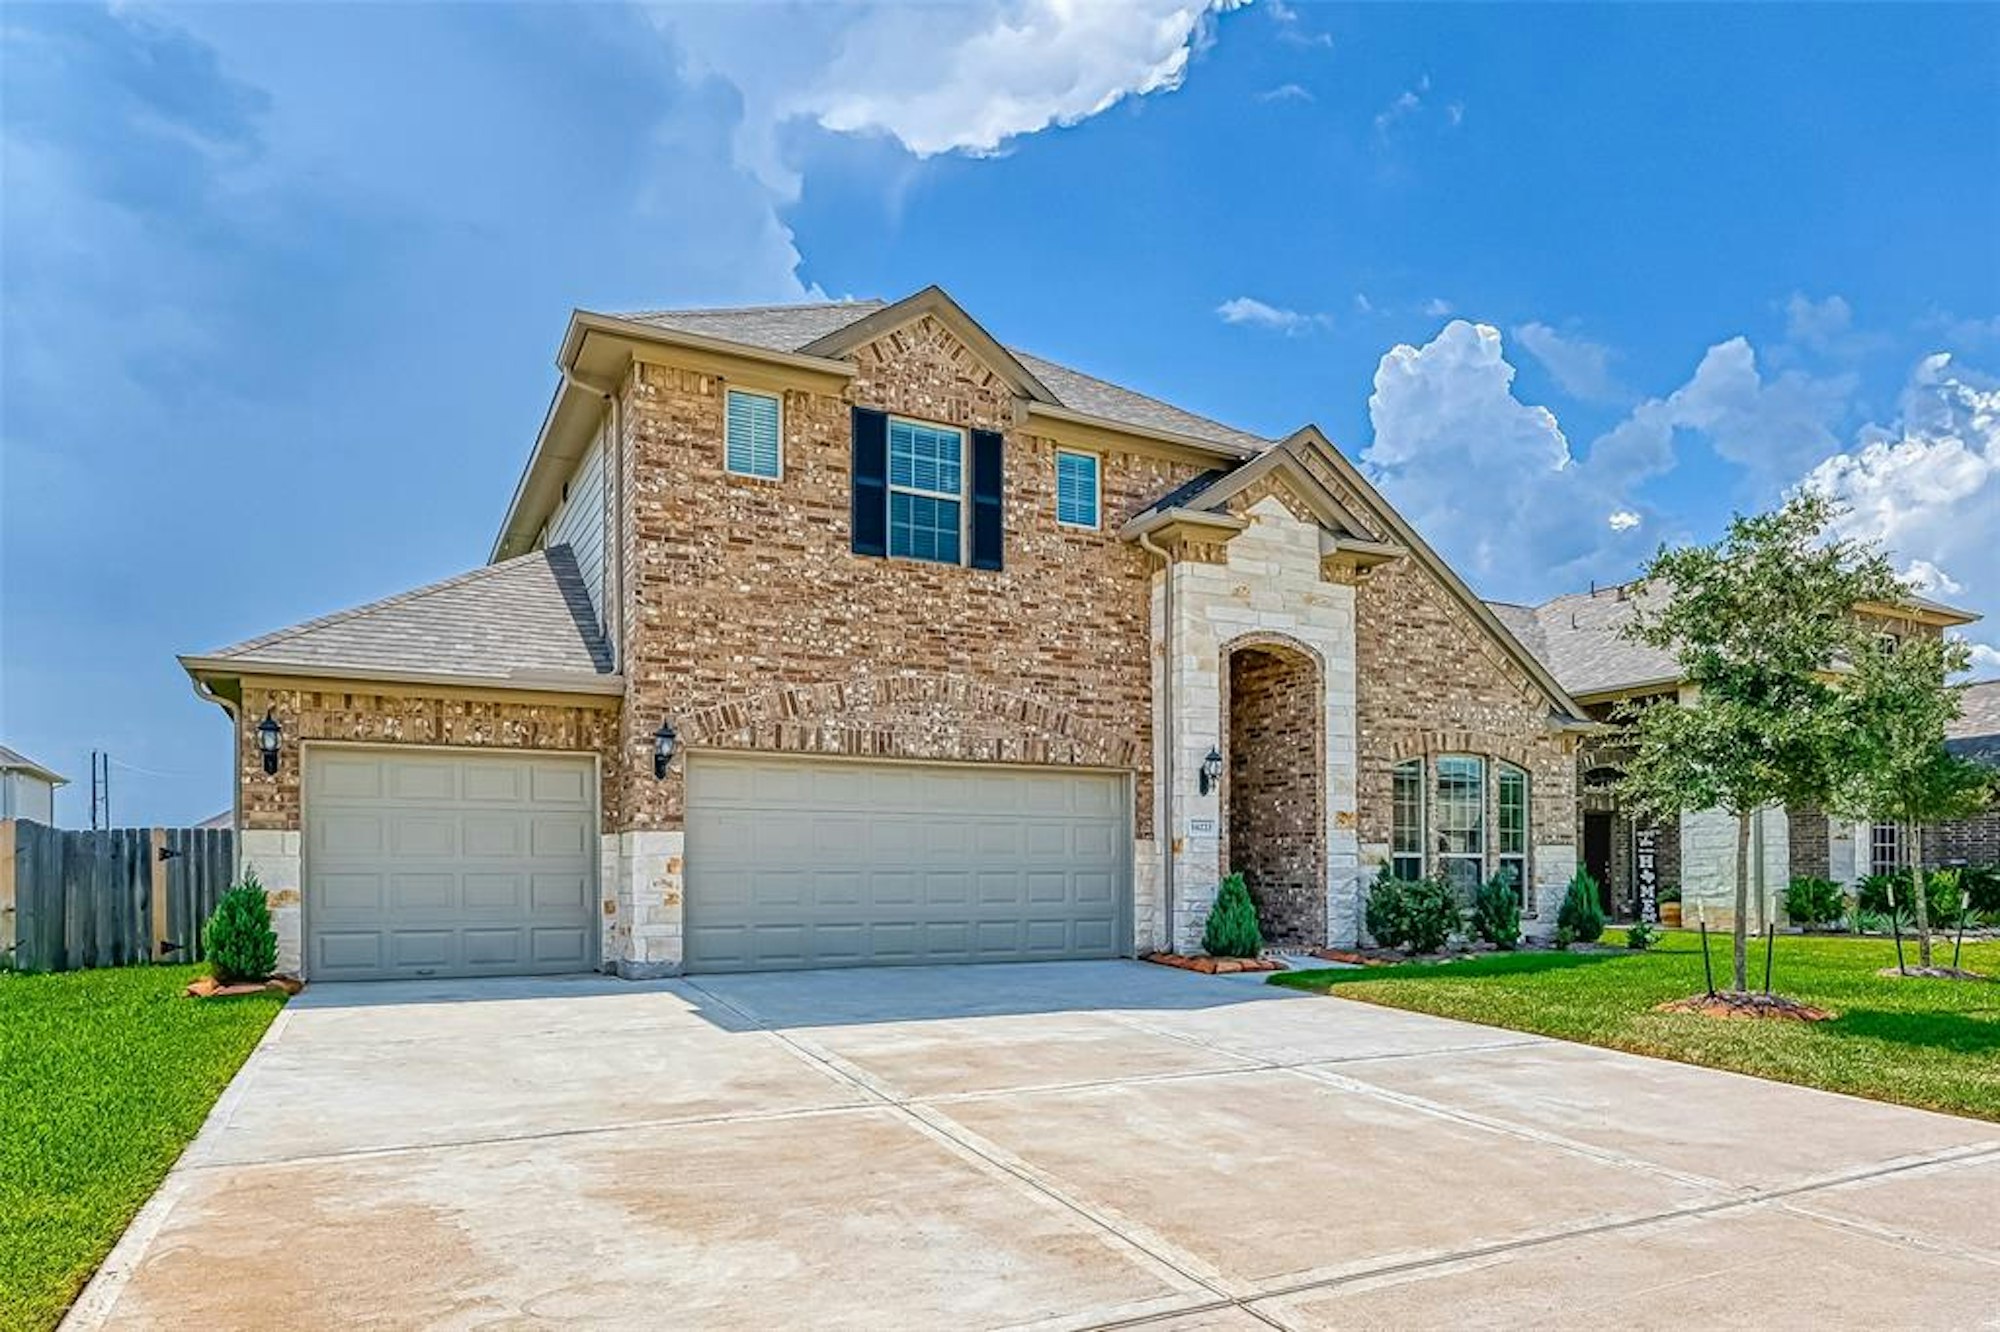 Photo 1 of 37 - 16223 Amber Brown Dr, Hockley, TX 77447